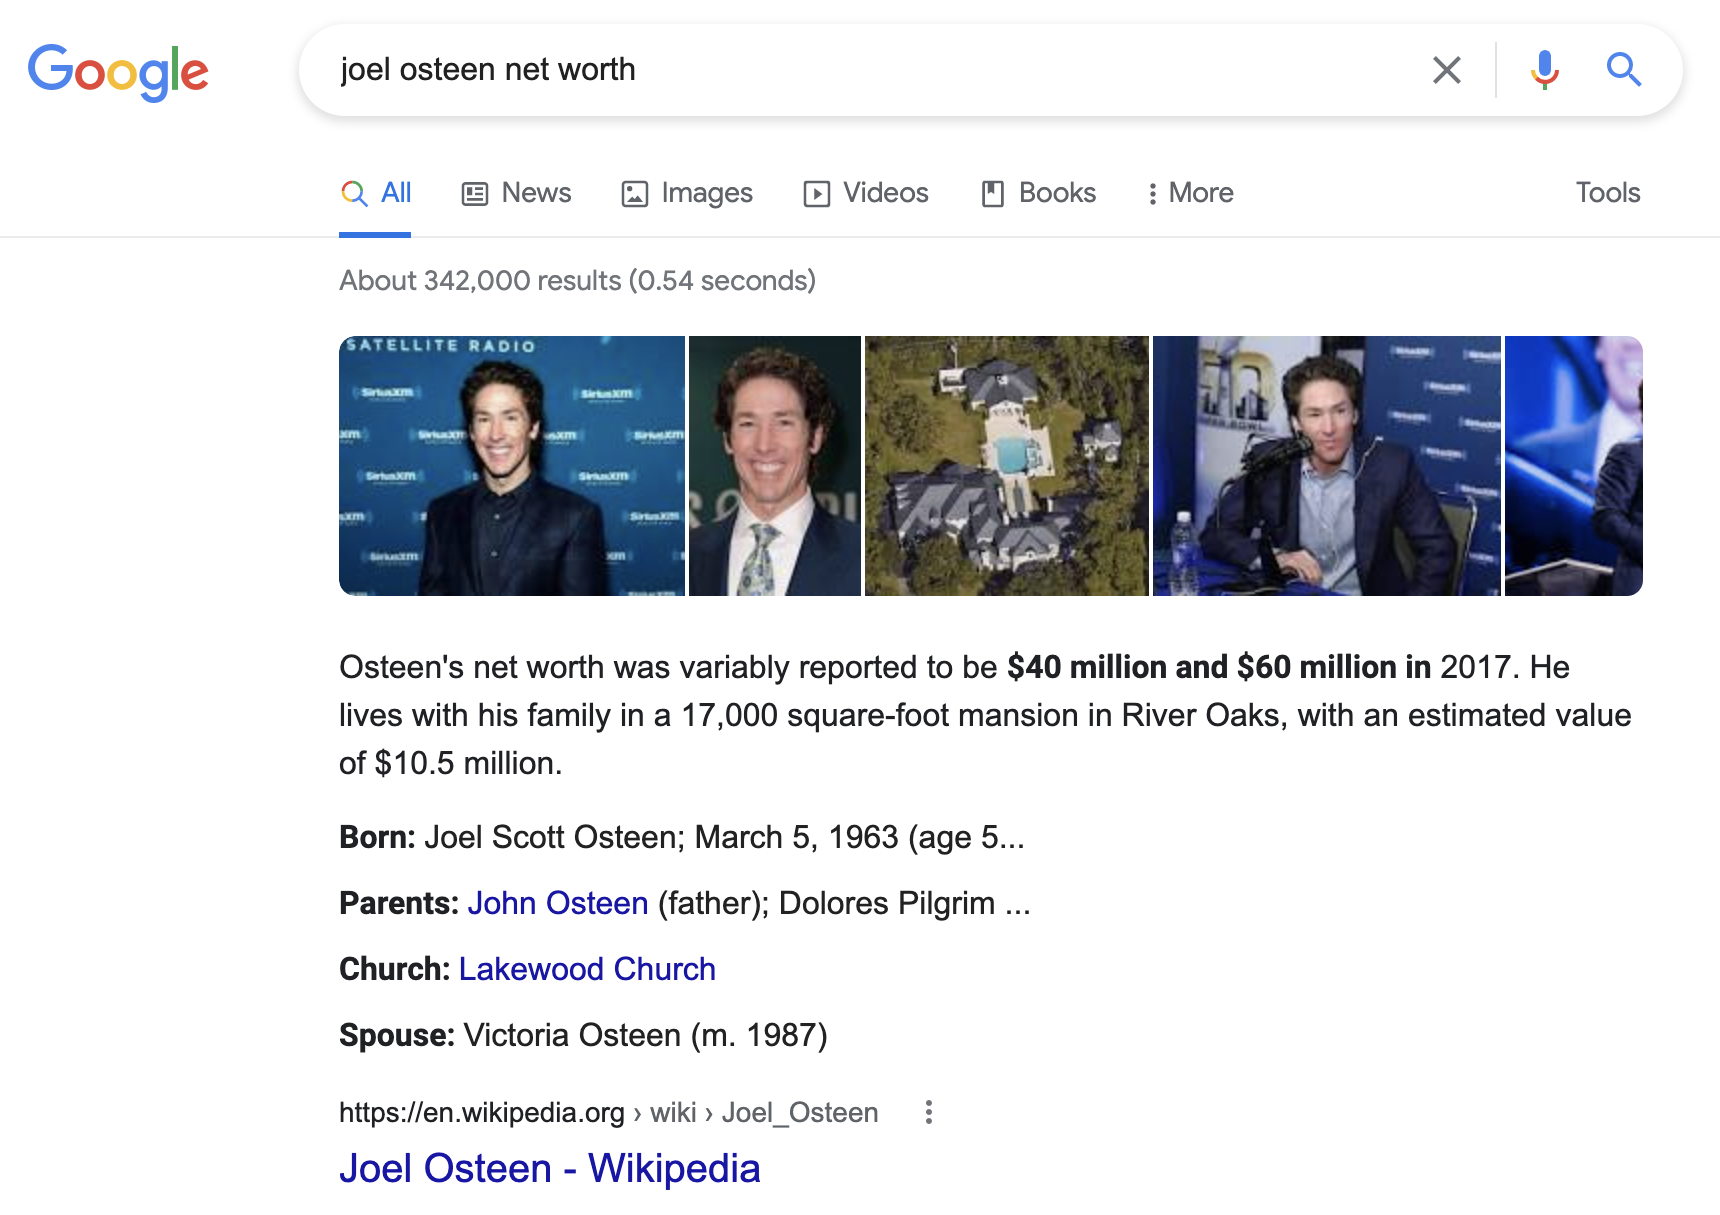 Joel Osteen's net worth was estimated to be $40 million or $60 million or $100 million.